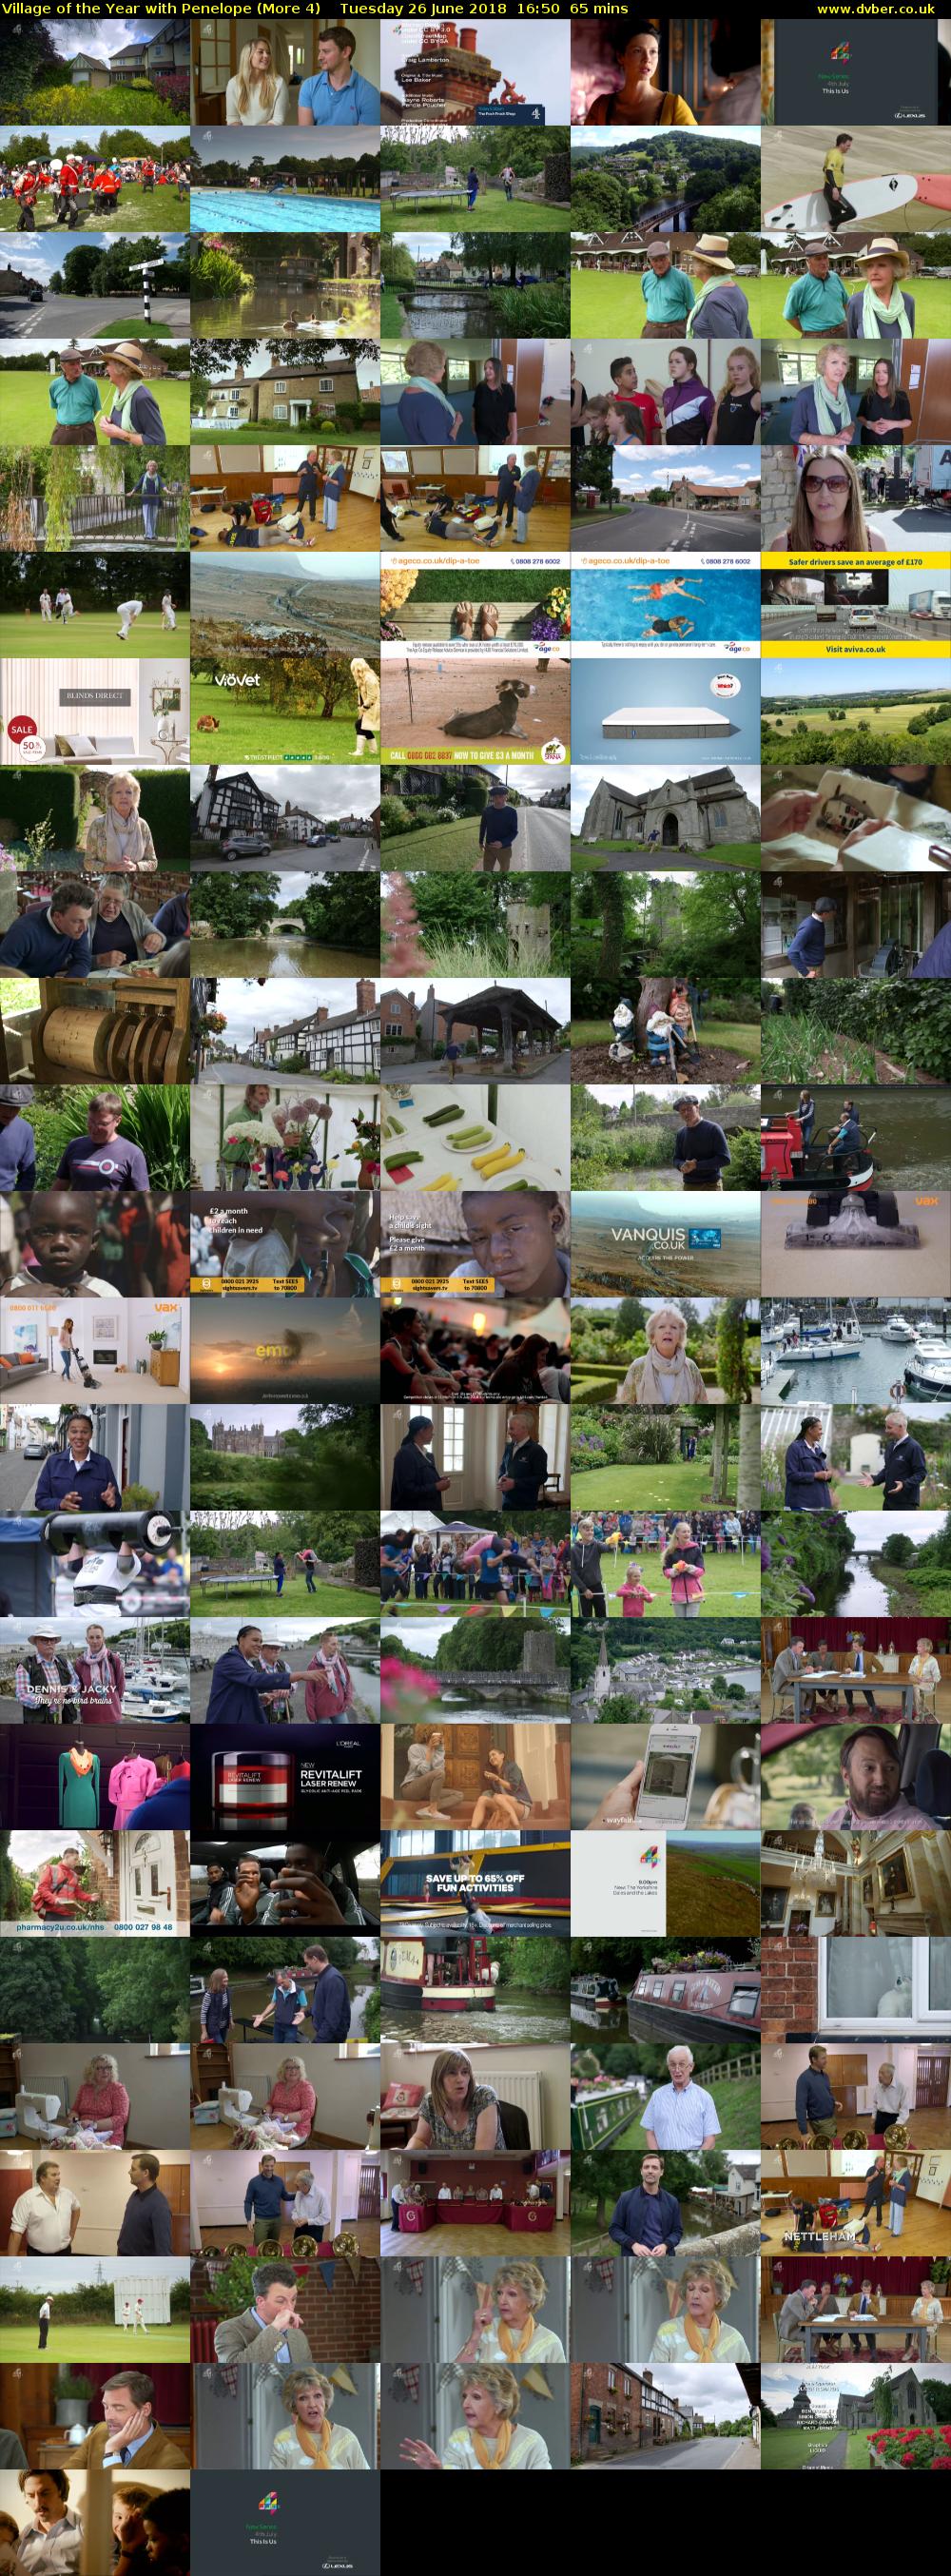 Village of the Year with Penelope (More 4) Tuesday 26 June 2018 16:50 - 17:55